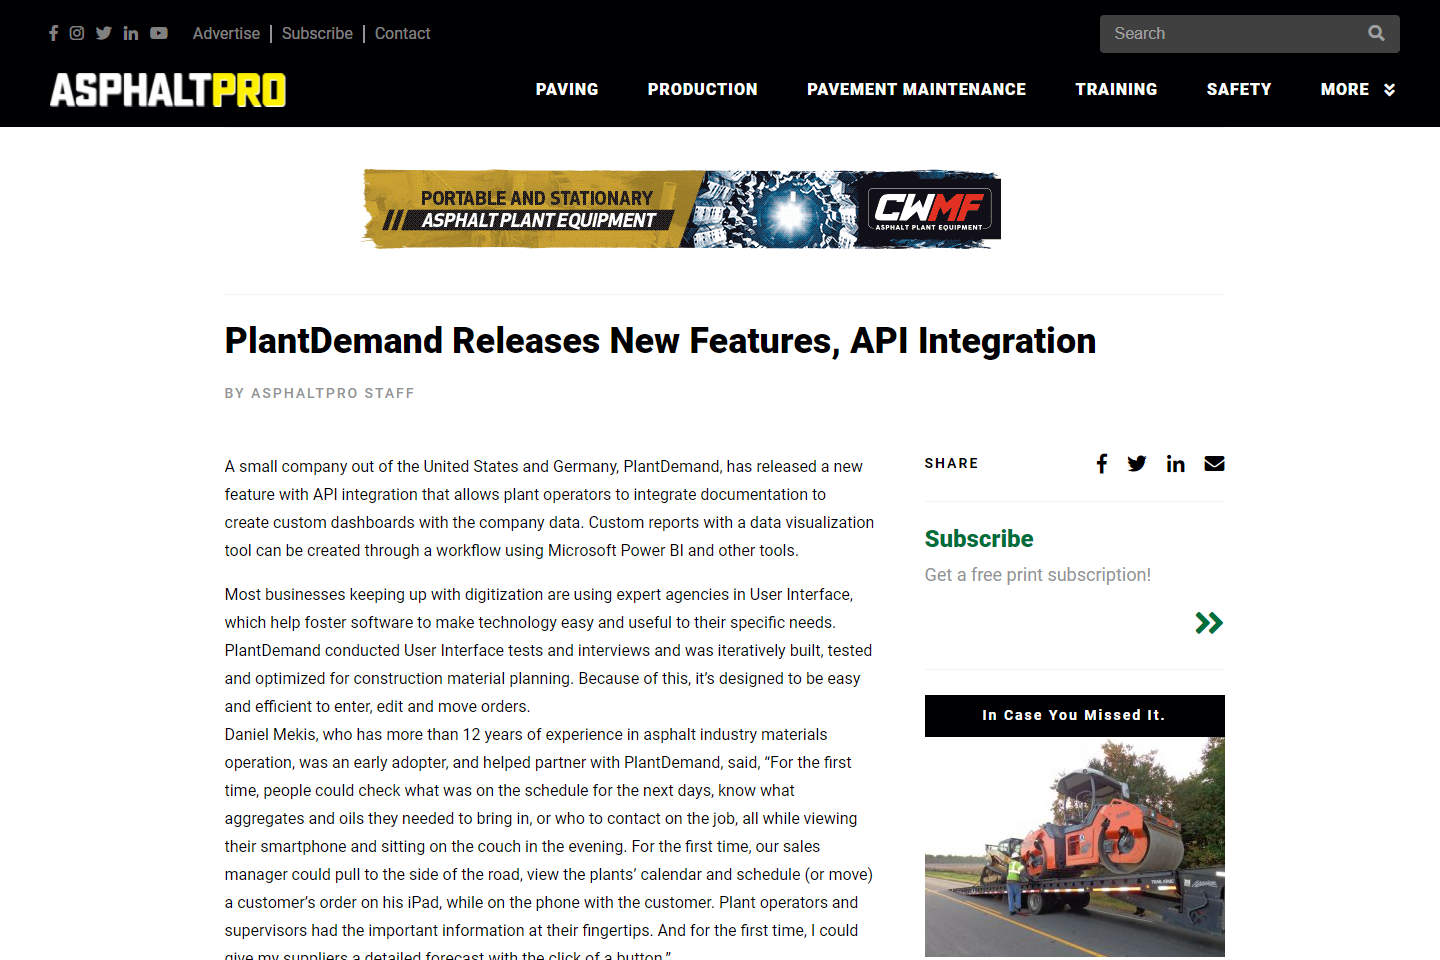 PlantDemand Releases New Features, API Integration